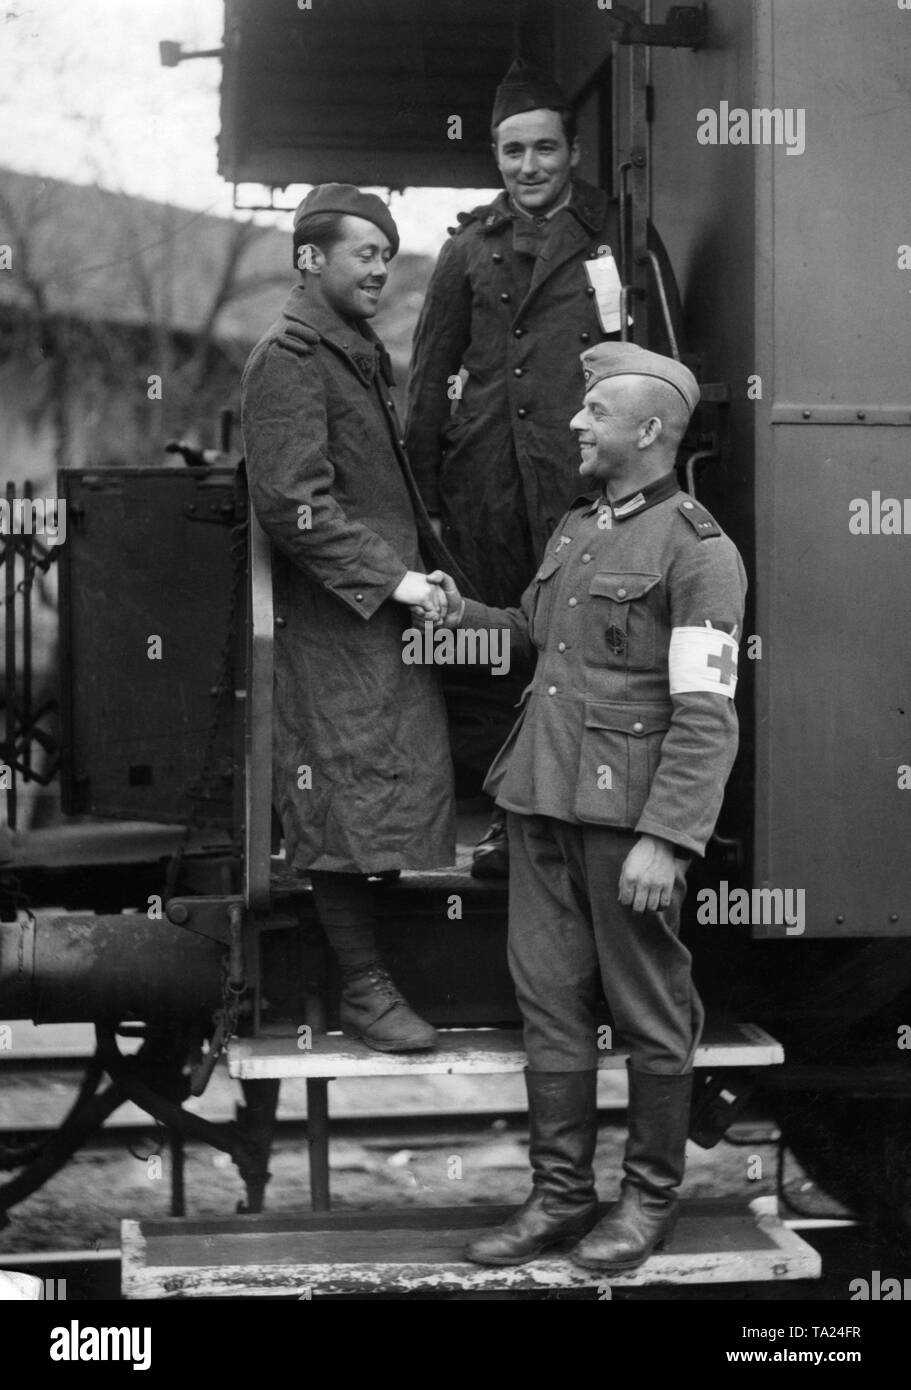 French prisoners of war, who have been released for health reasons from captivity and are now being repatriated, arrive in Chalon-sur-Saone at the Franco-German demarcation lines. A German paramedic shakes hands here in farewell. On the chest is clearly visible the SA Sports Badge. Stock Photo